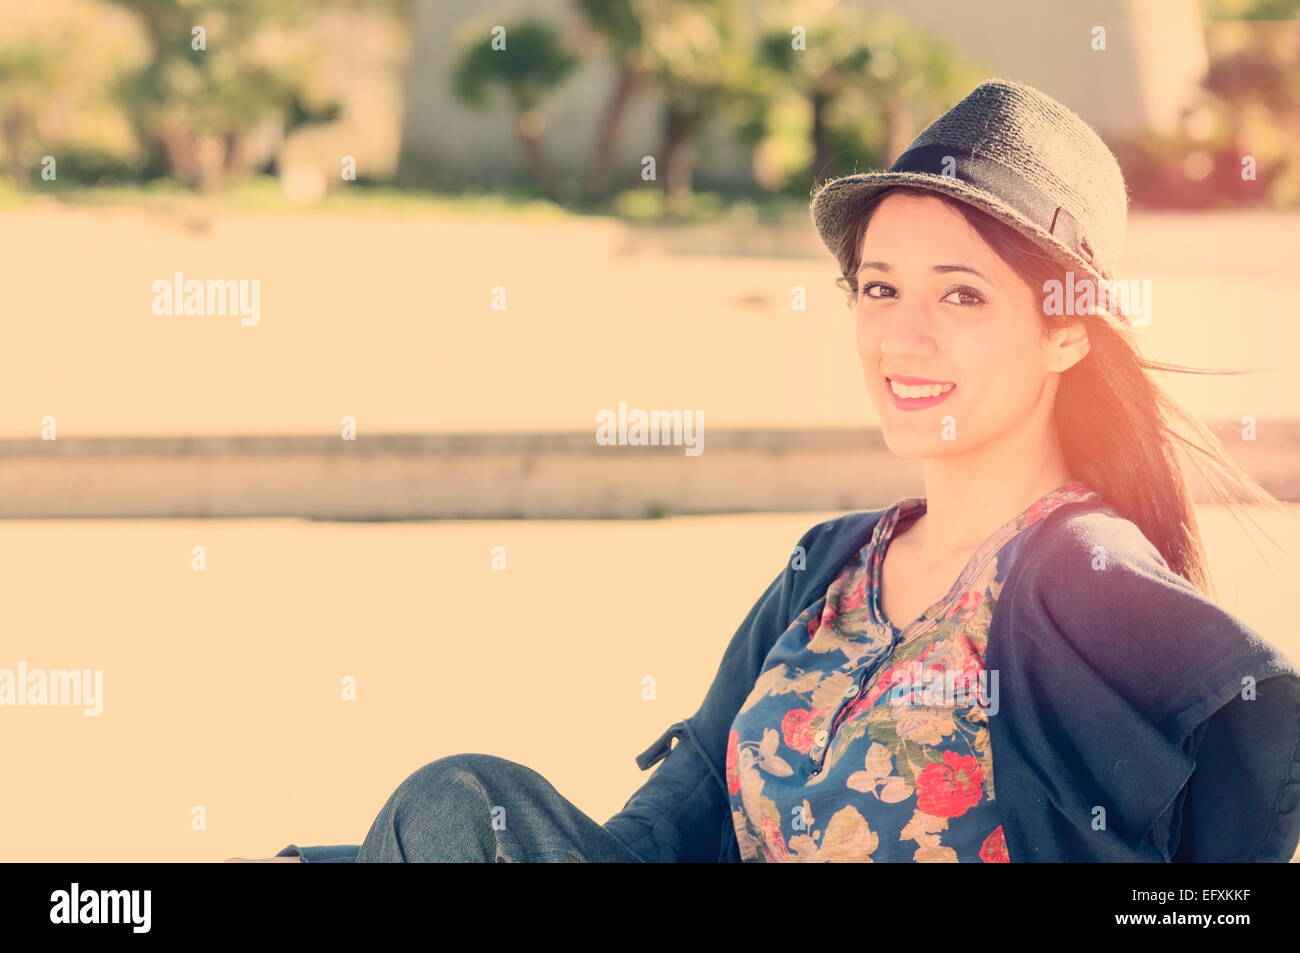 a young girl smiling in a sunny and day instagram filter applied Stock Photo